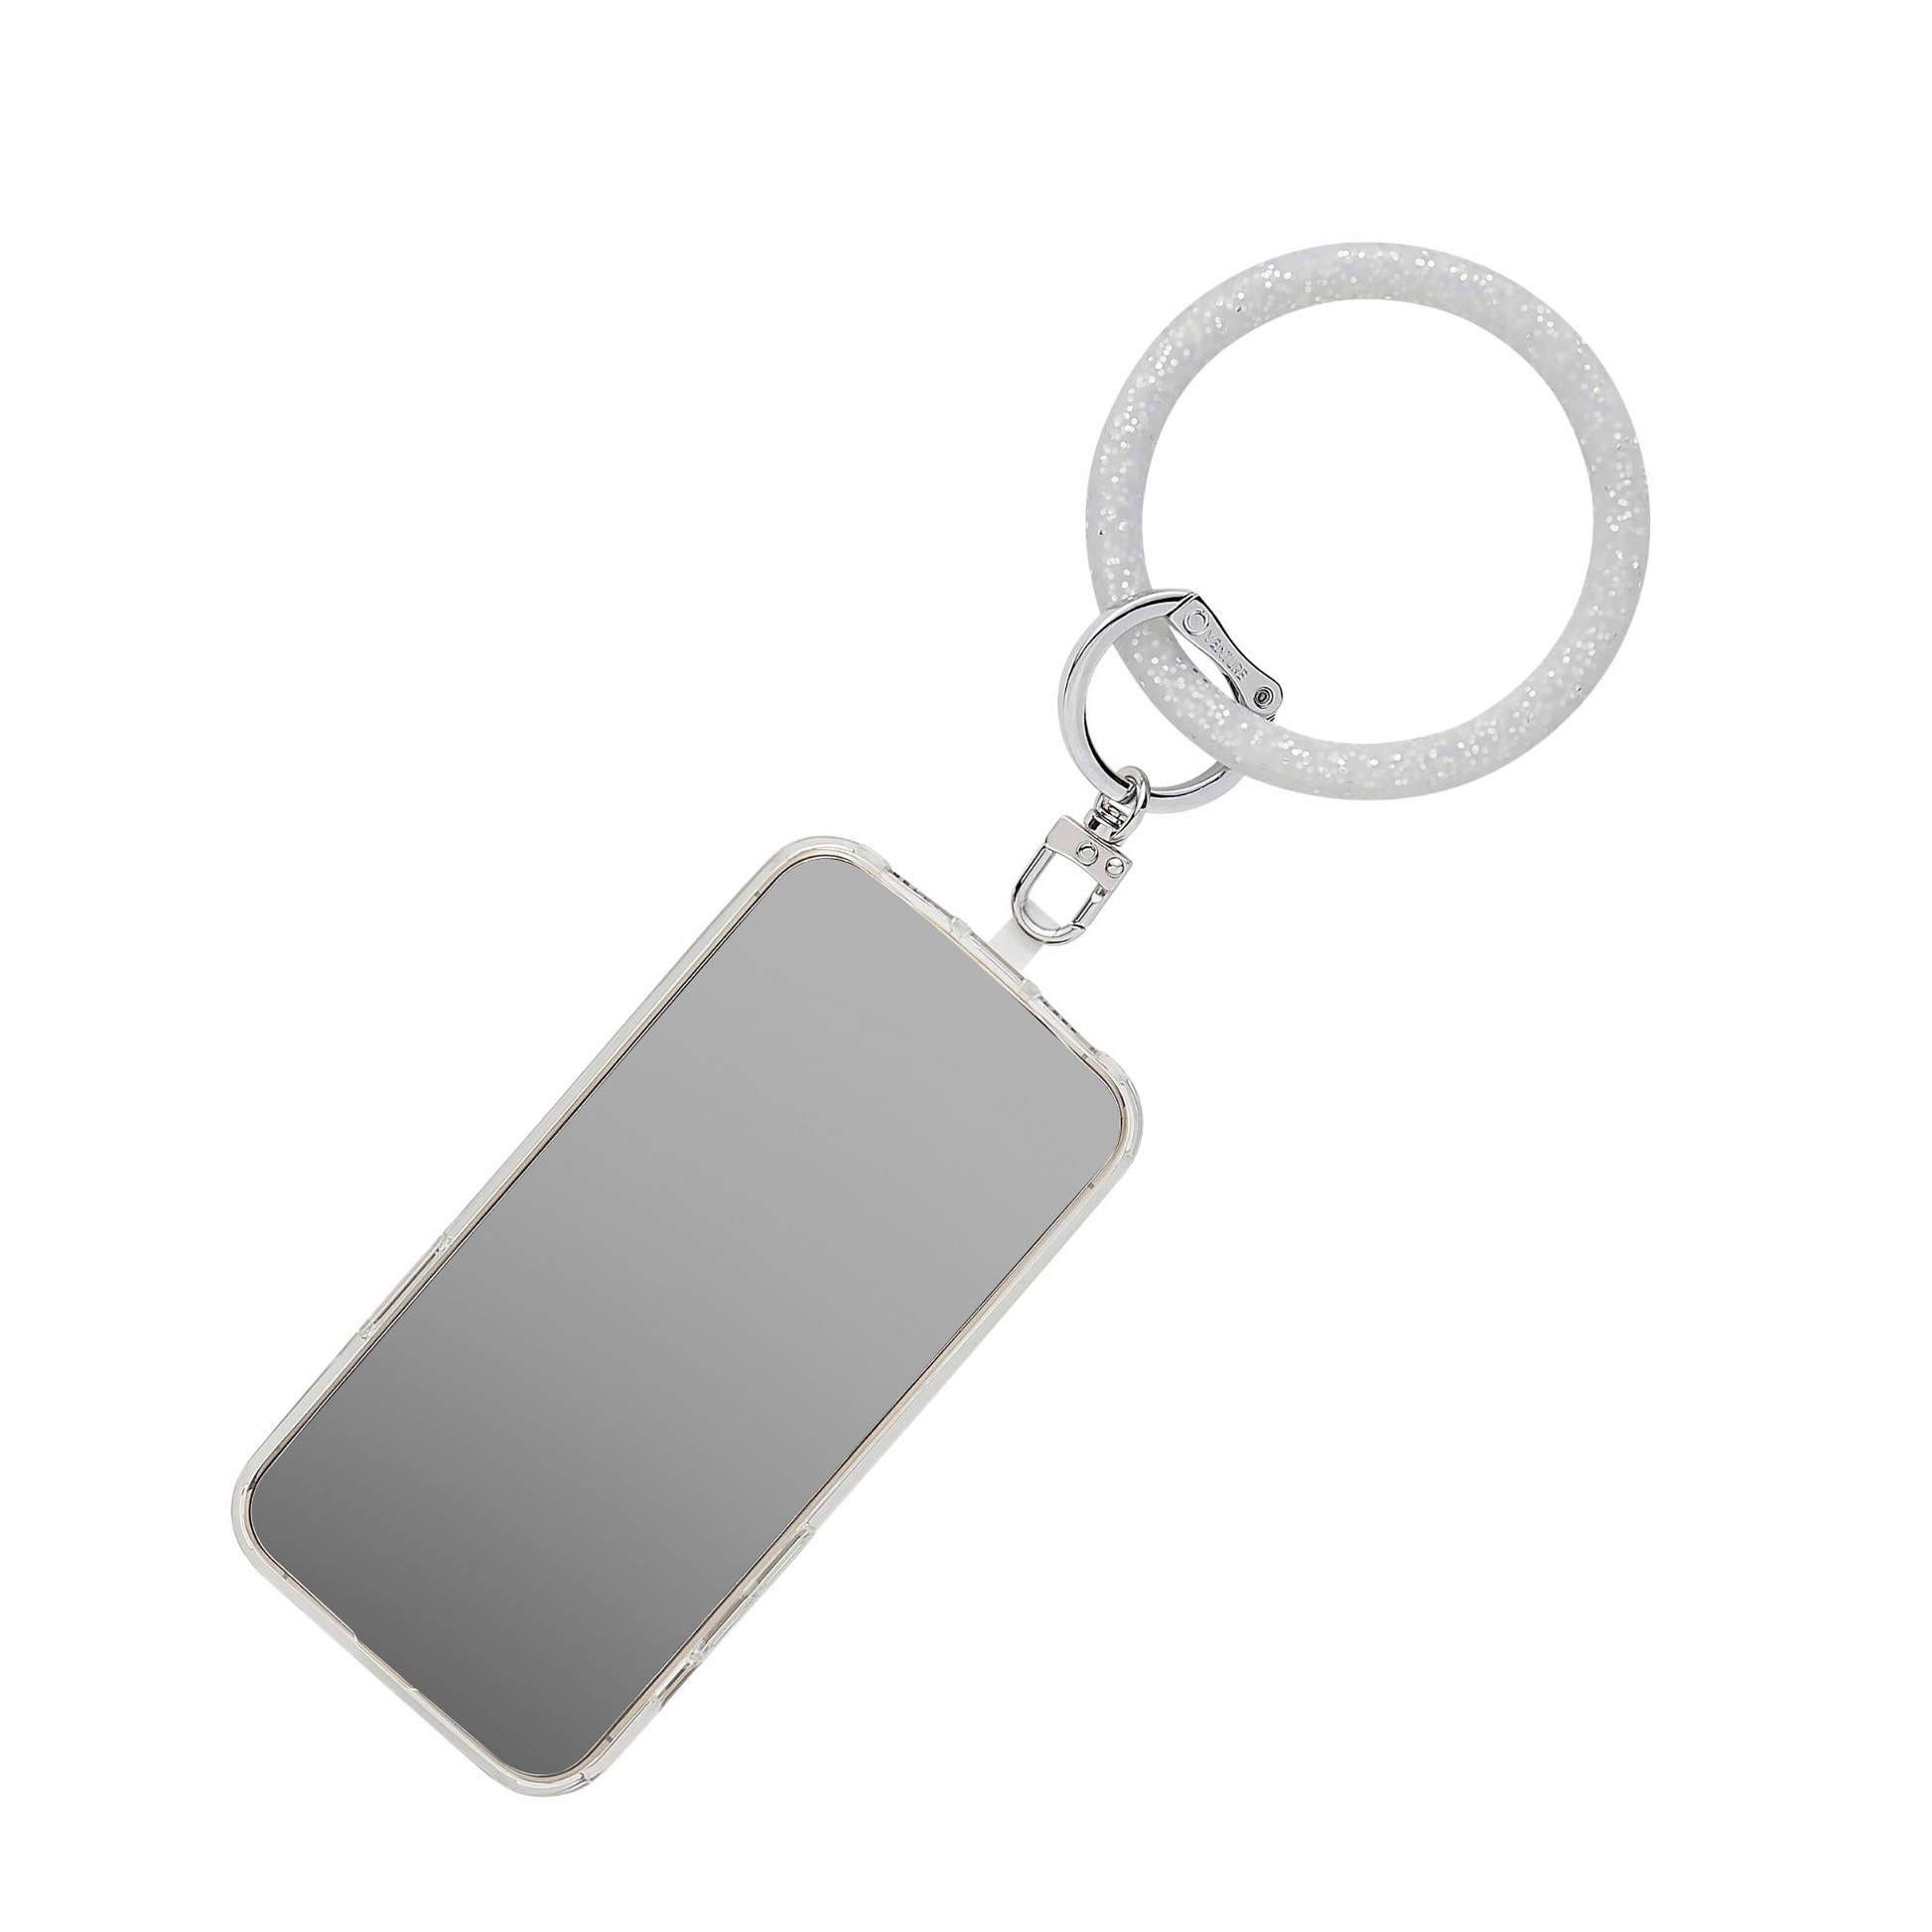 Quicksilver Big O Key Ring and Hook Me Up Phone Connector Oventure. Connects your phone to a bangle bracelet.